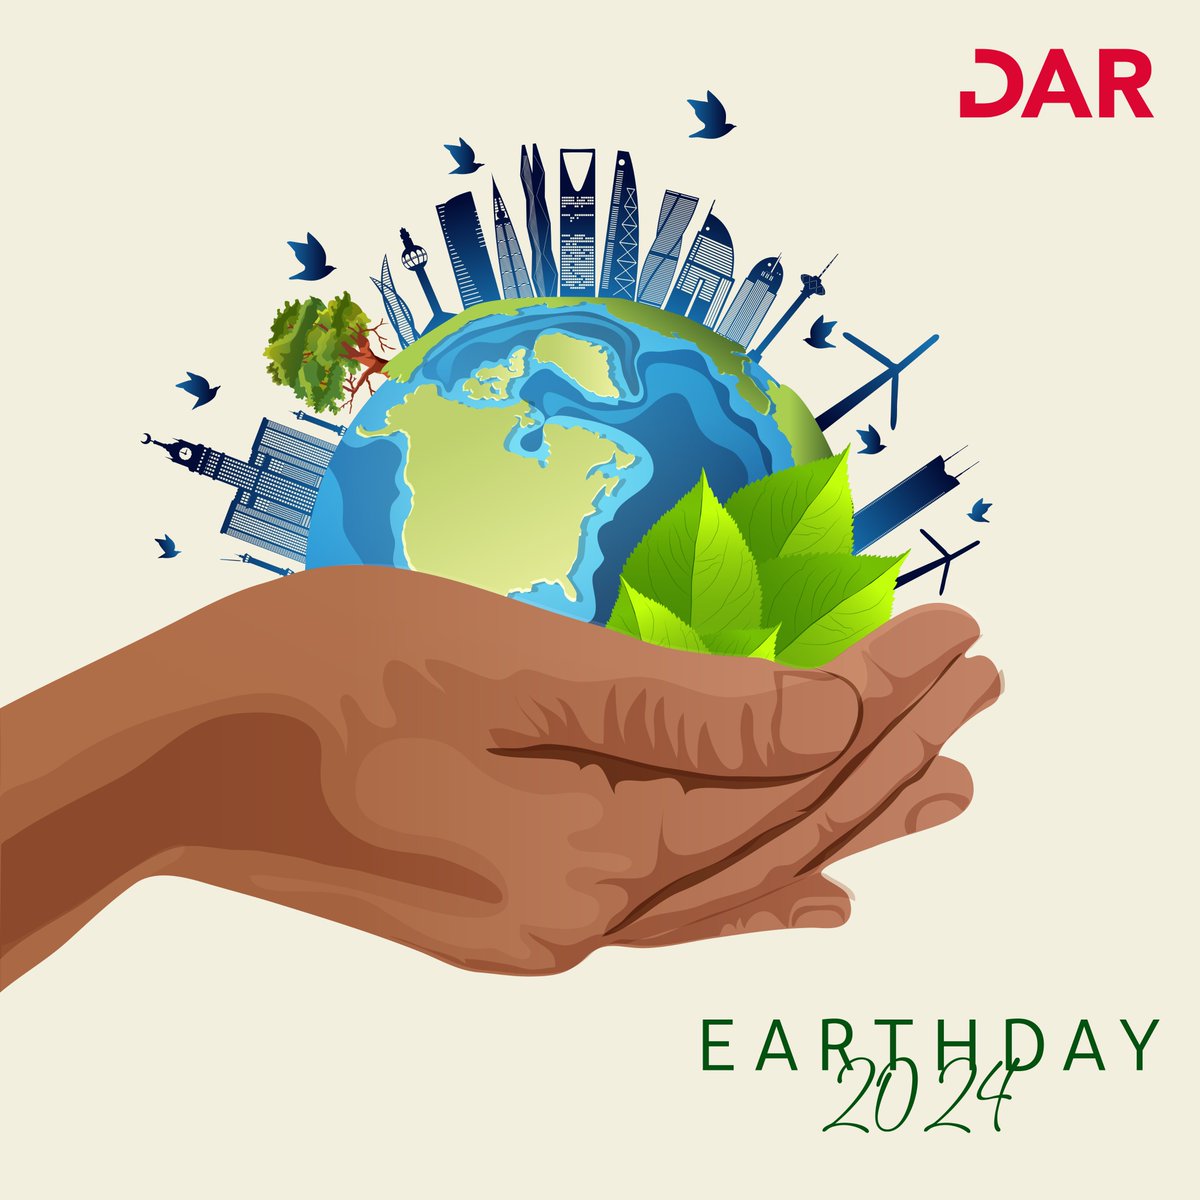 Happy Earth Day! On this very special day, we celebrate our beautiful planet and reflect on how our contributions to sustainable construction can make a positive impact.

#earthday #darengineering #sustainablebuilding #gogreen #Green #Sustainability #greenbuildings